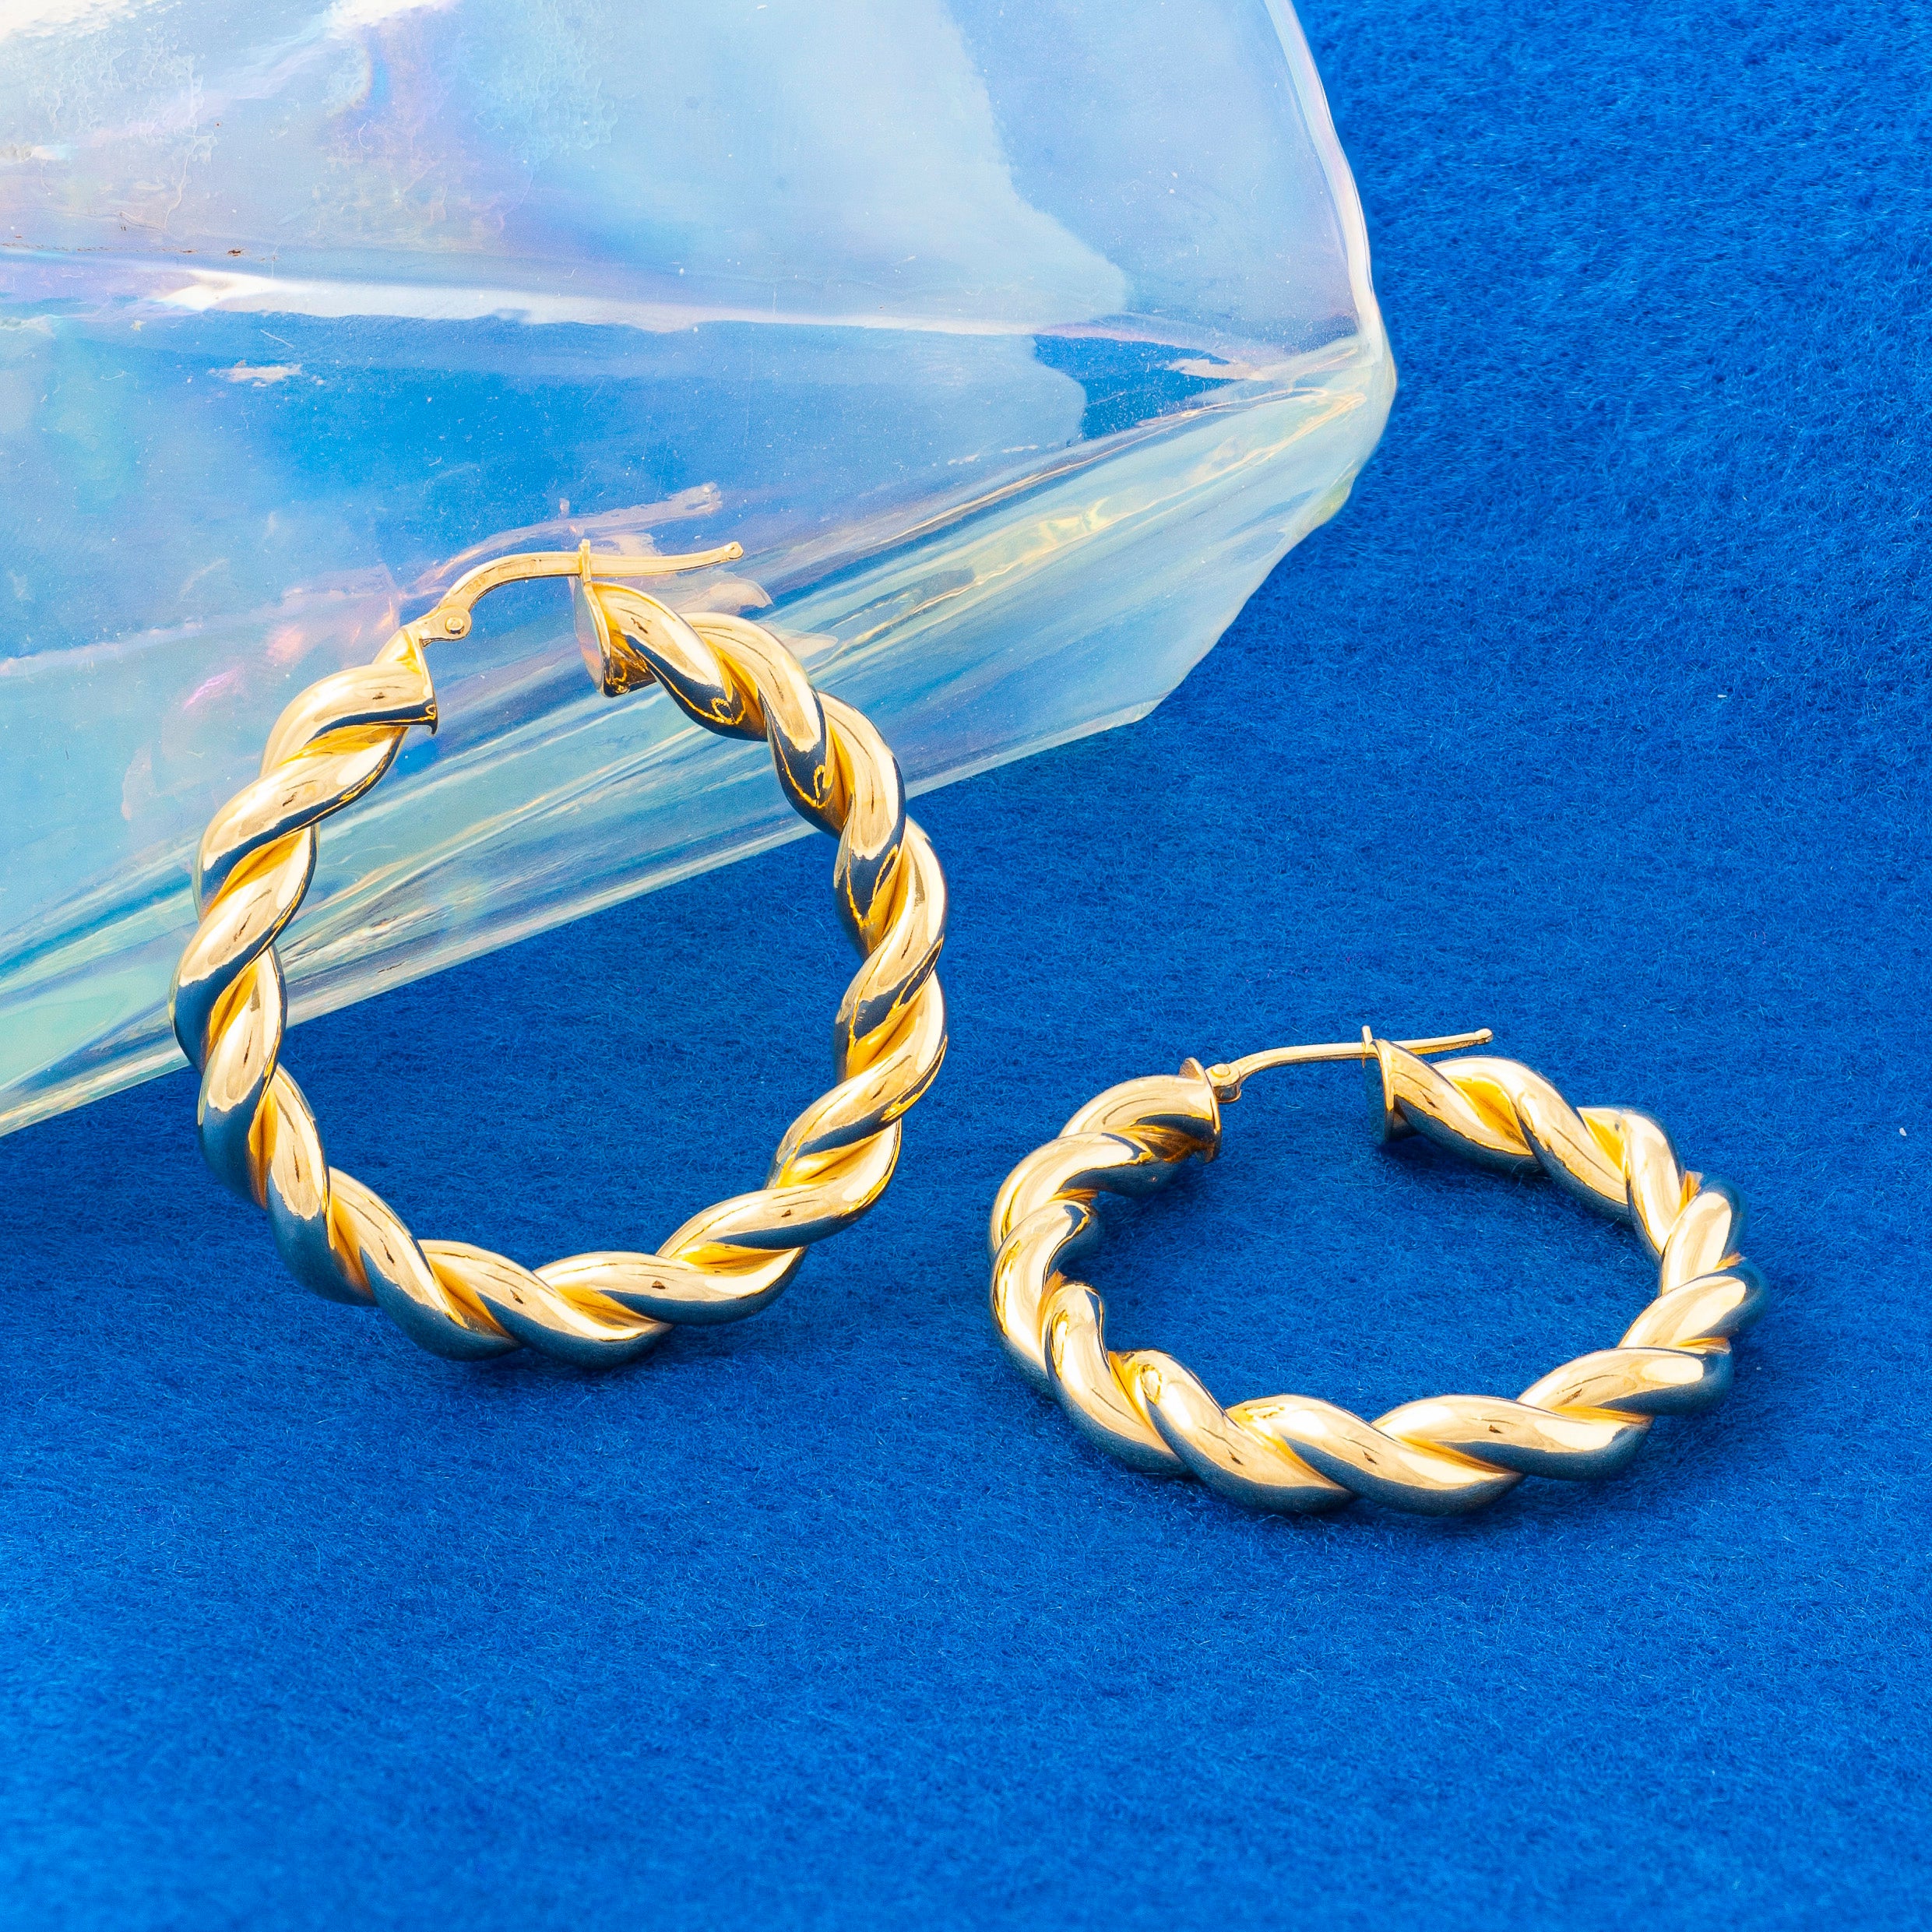 THICK GOLD SPIRAL HOOP EARRINGS